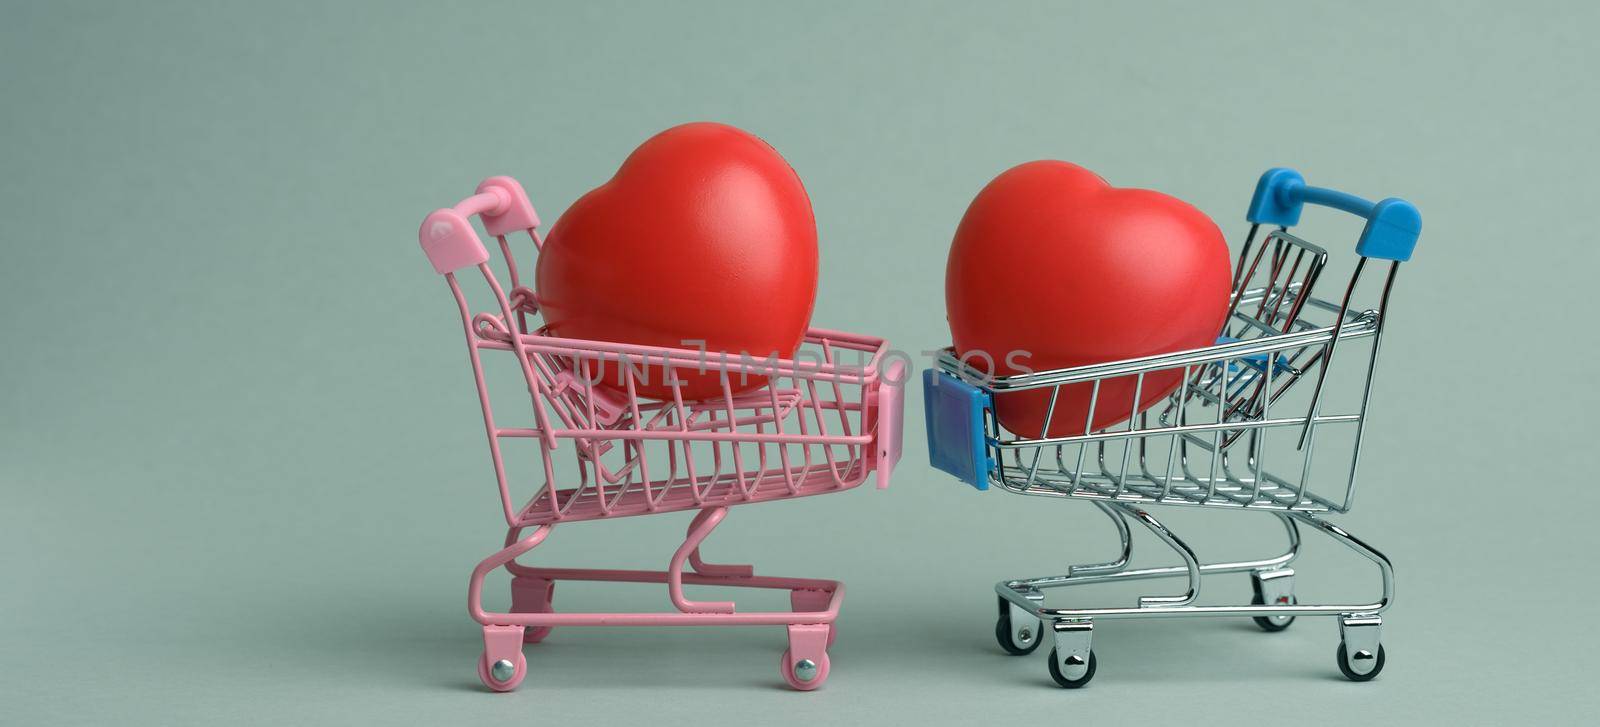 red heart in a miniature metal trolley from the store on a gray background. Organ donation, transplant concept